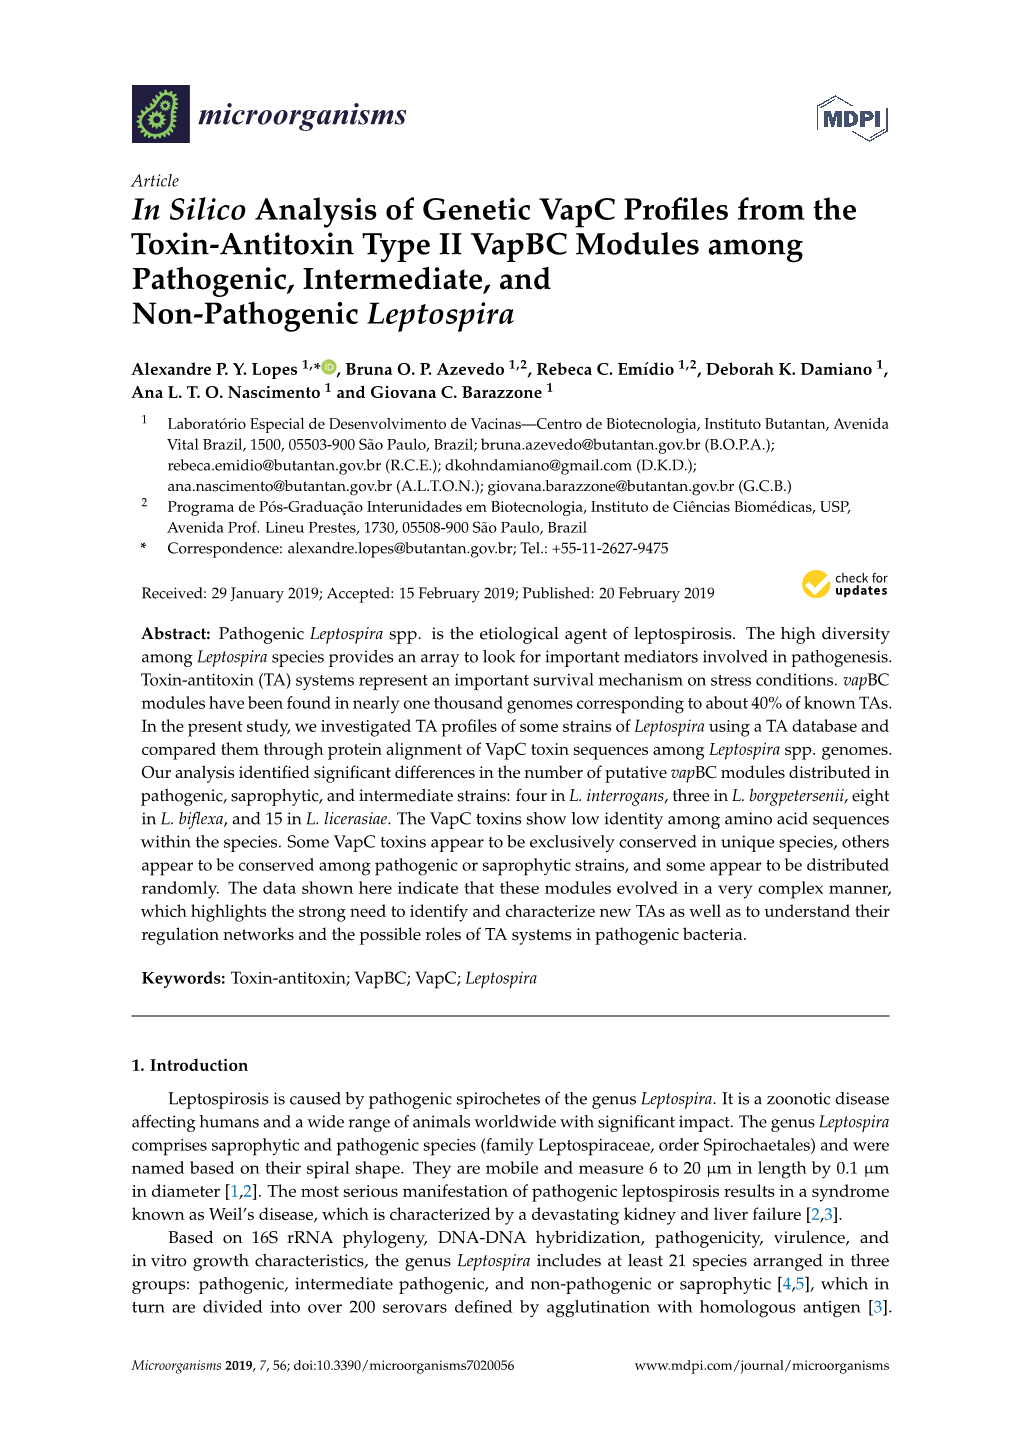 In Silico Analysis of Genetic Vapc Profiles from the Toxin-Antitoxin